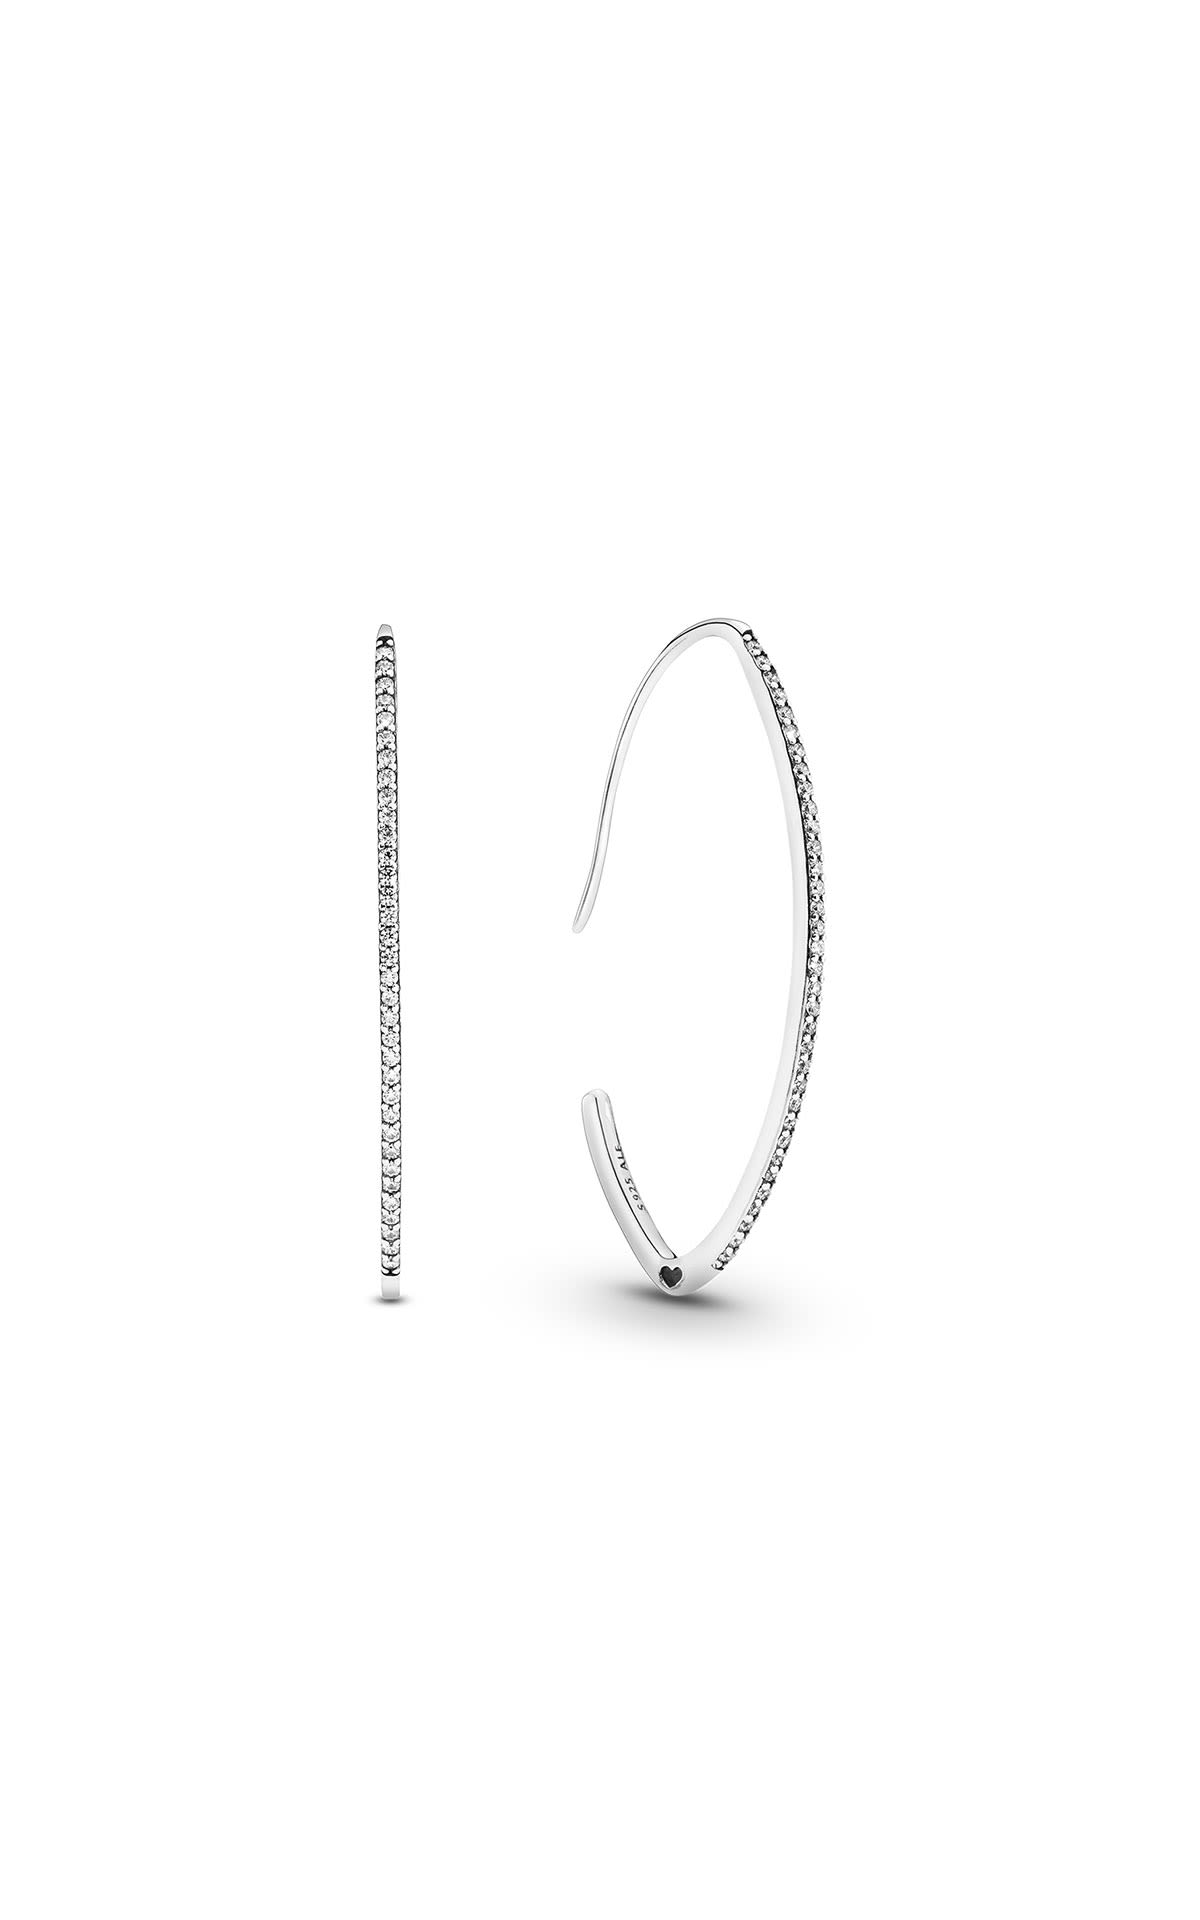 Pandora Oval sparkle hoop earrings from Bicester Village